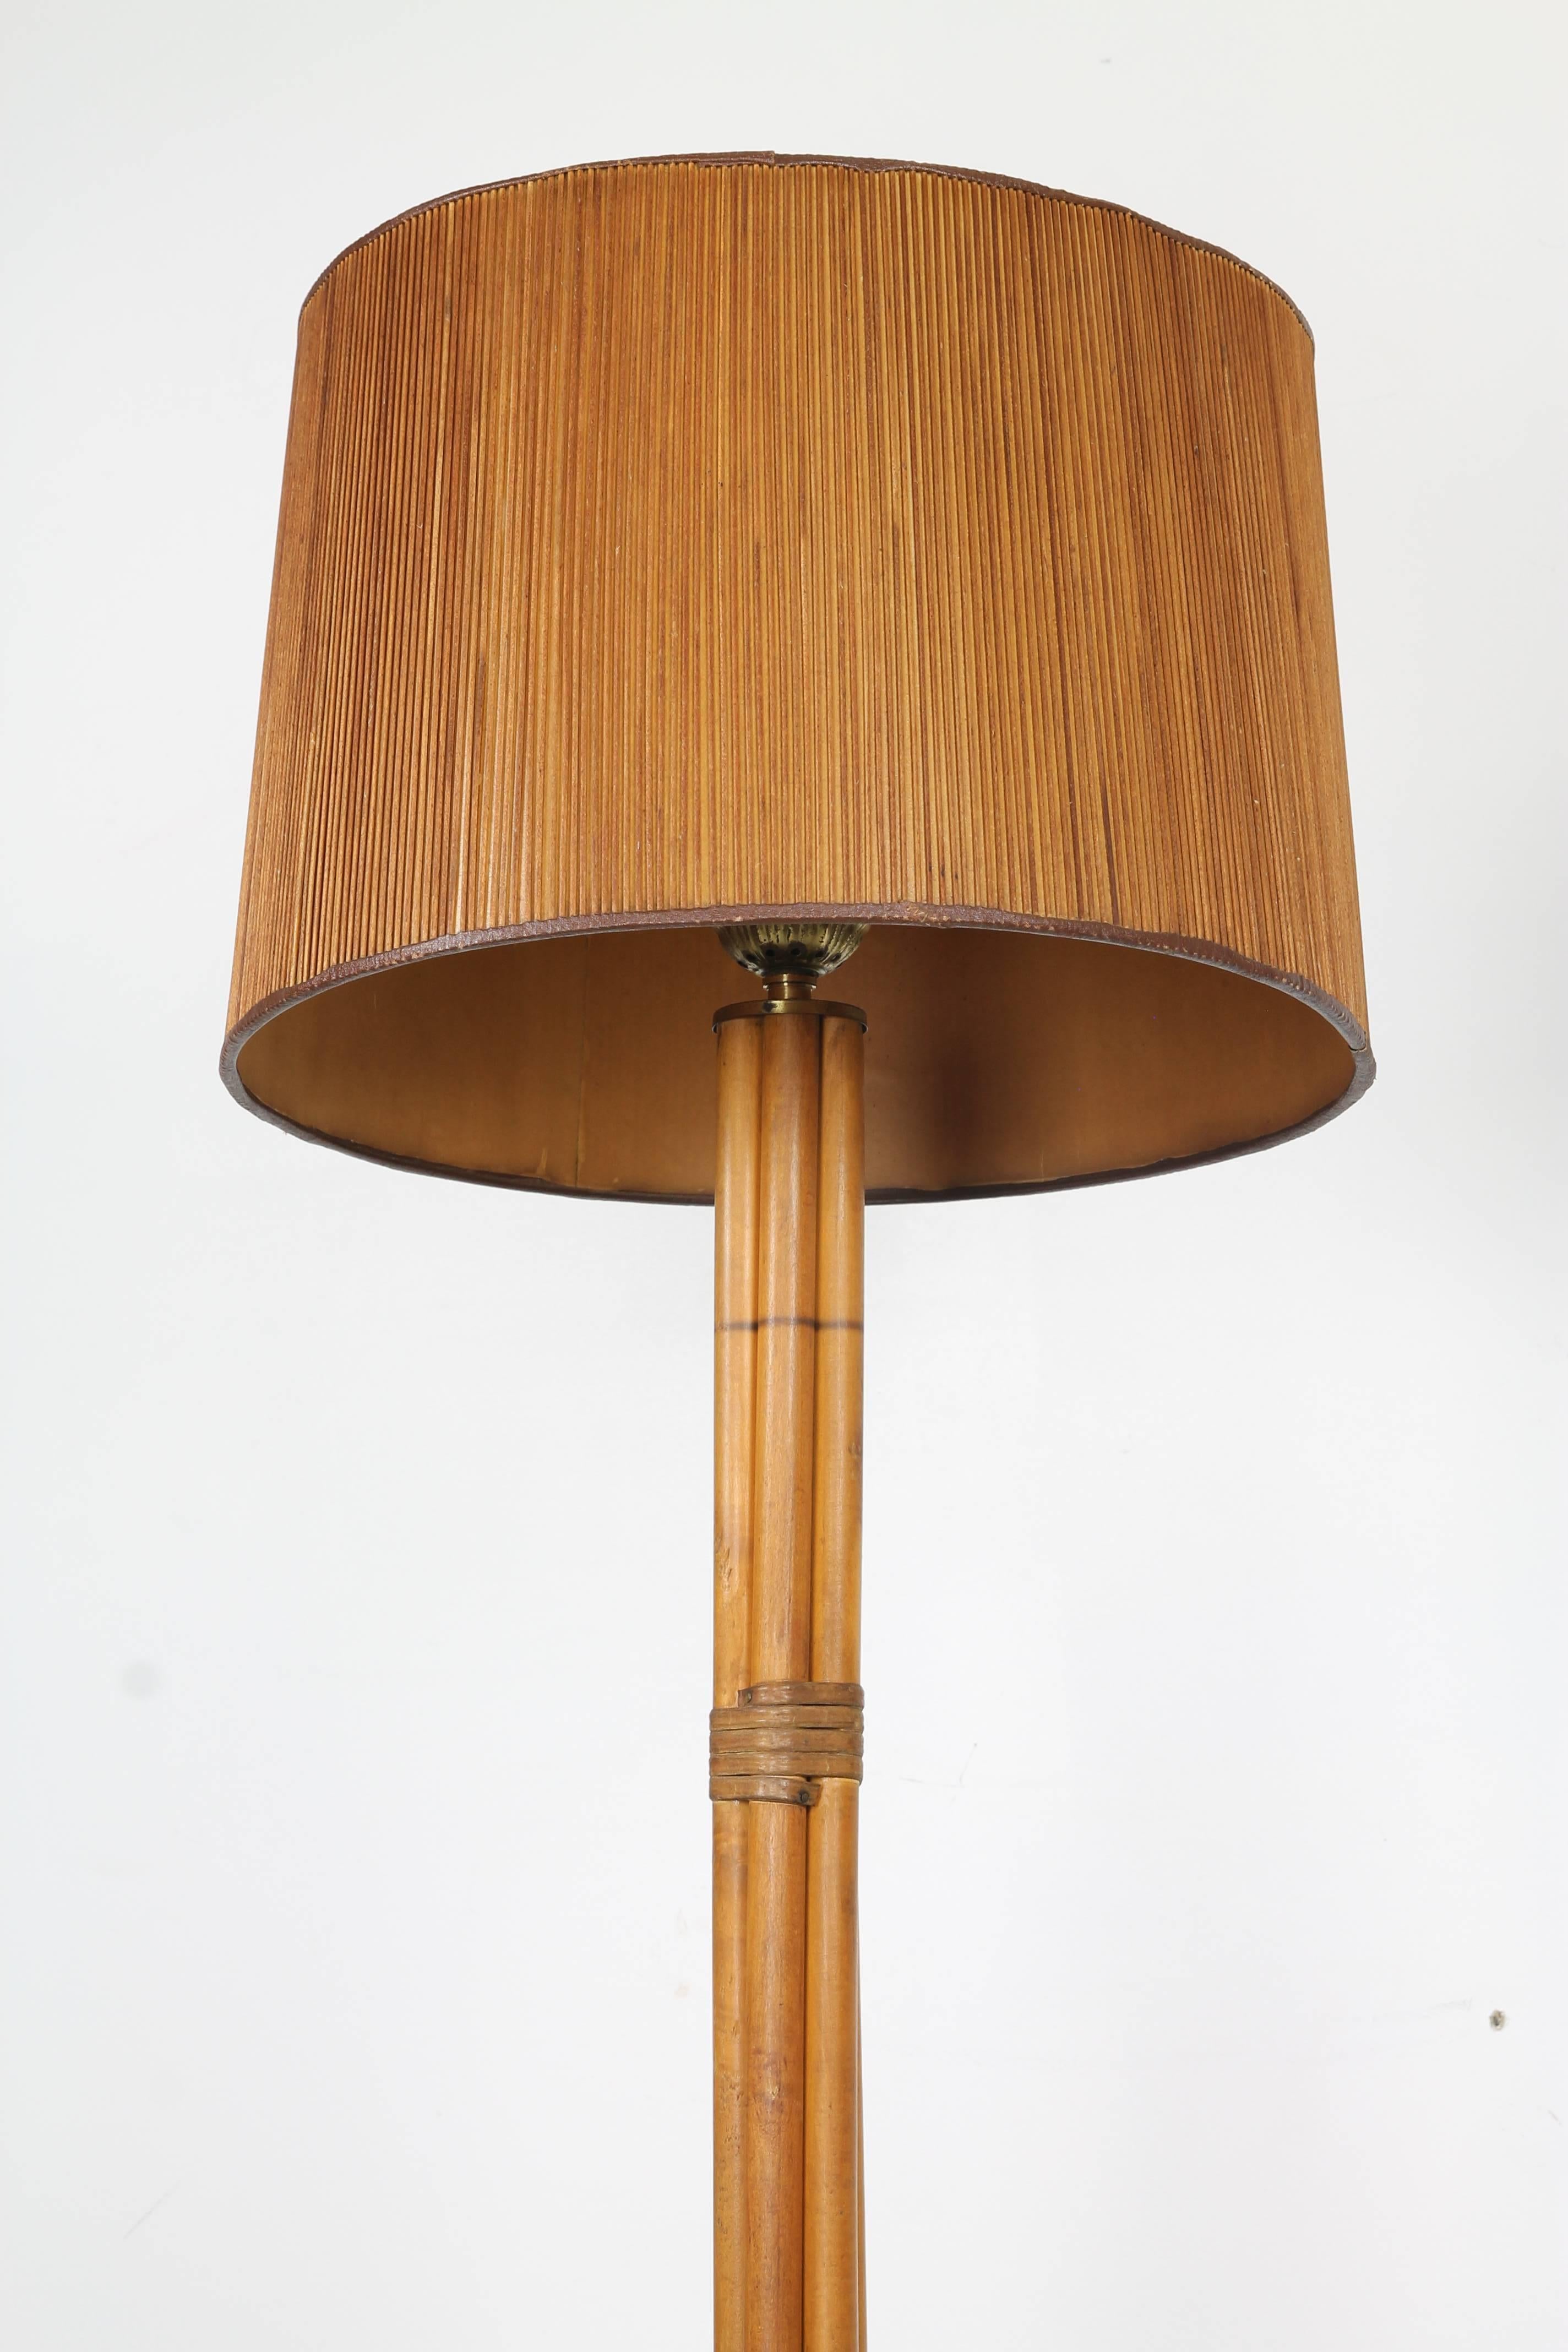 American Bamboo Floor Lamp in the Manner of Paul Frankl